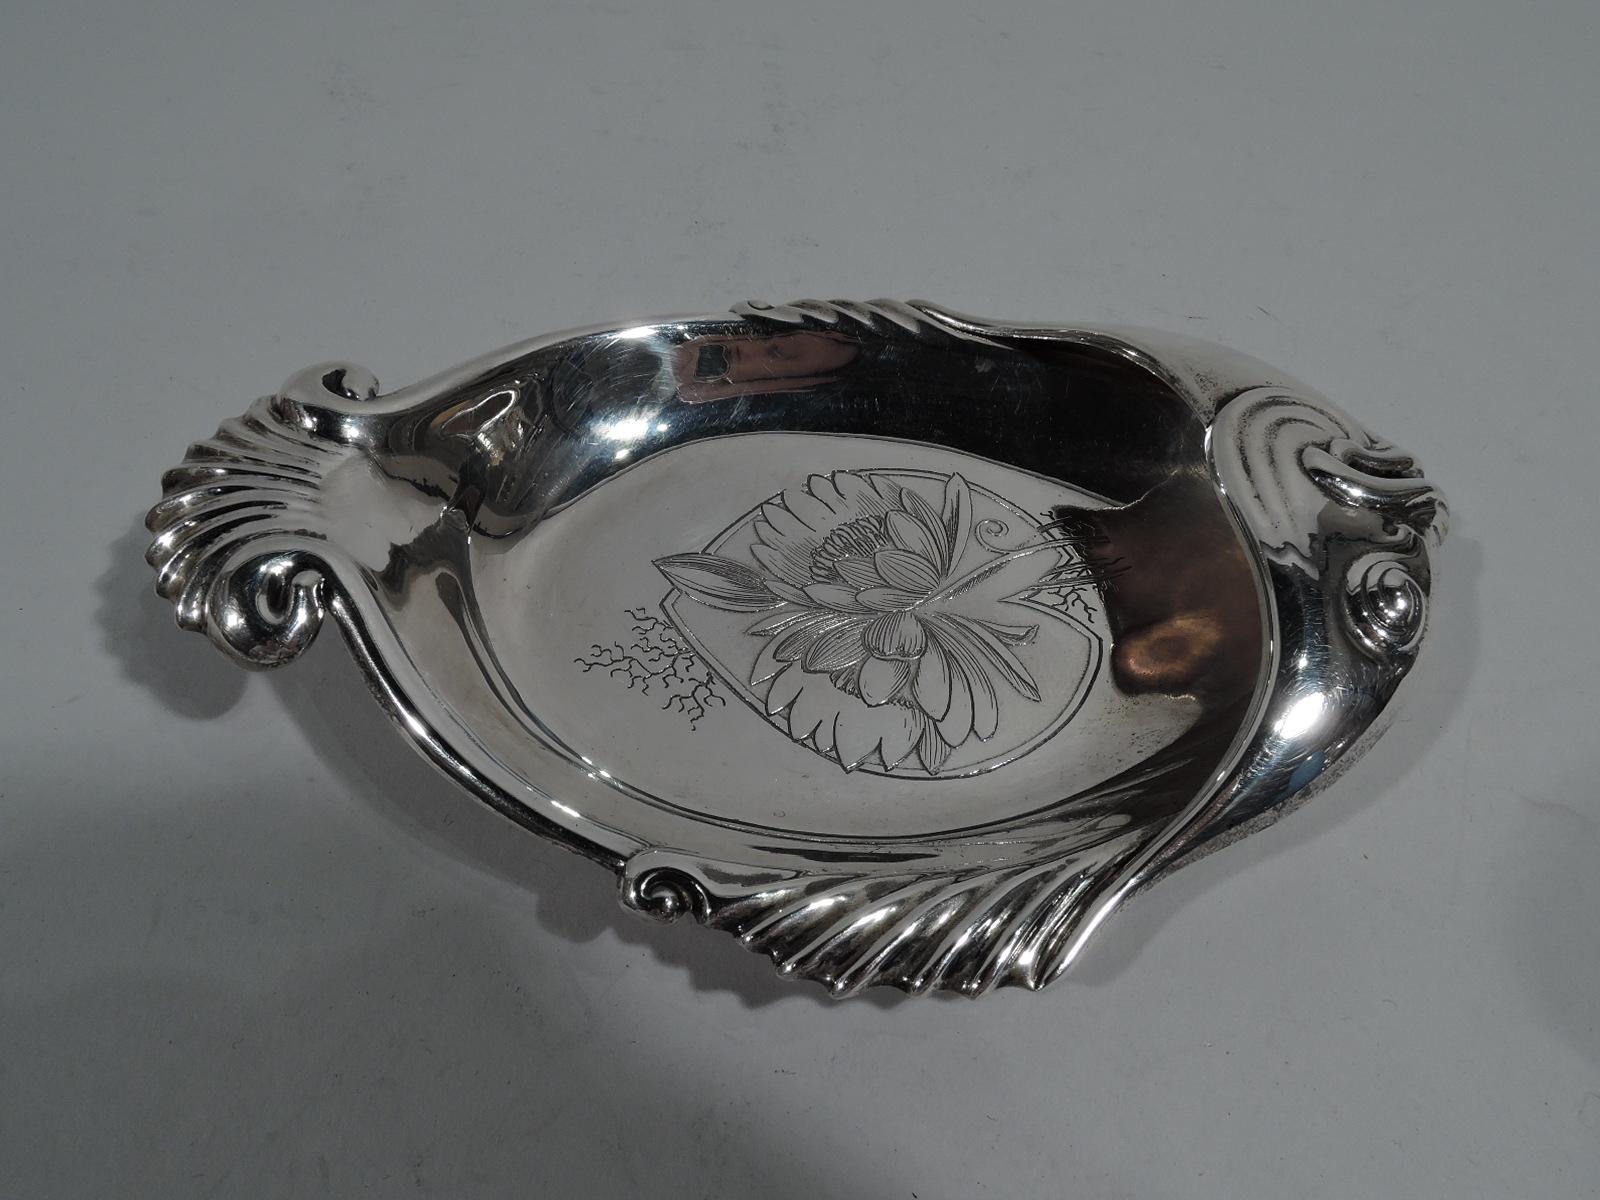 Aesthetic sterling silver fish dish. Made by Whiting in New York, circa 1885. Curved sides, gadrooned fins and tail, and head with chased jowls, lips, and eyes. Stylized flowers engraved in well. Modish Japonesque design. Fully marked including no.